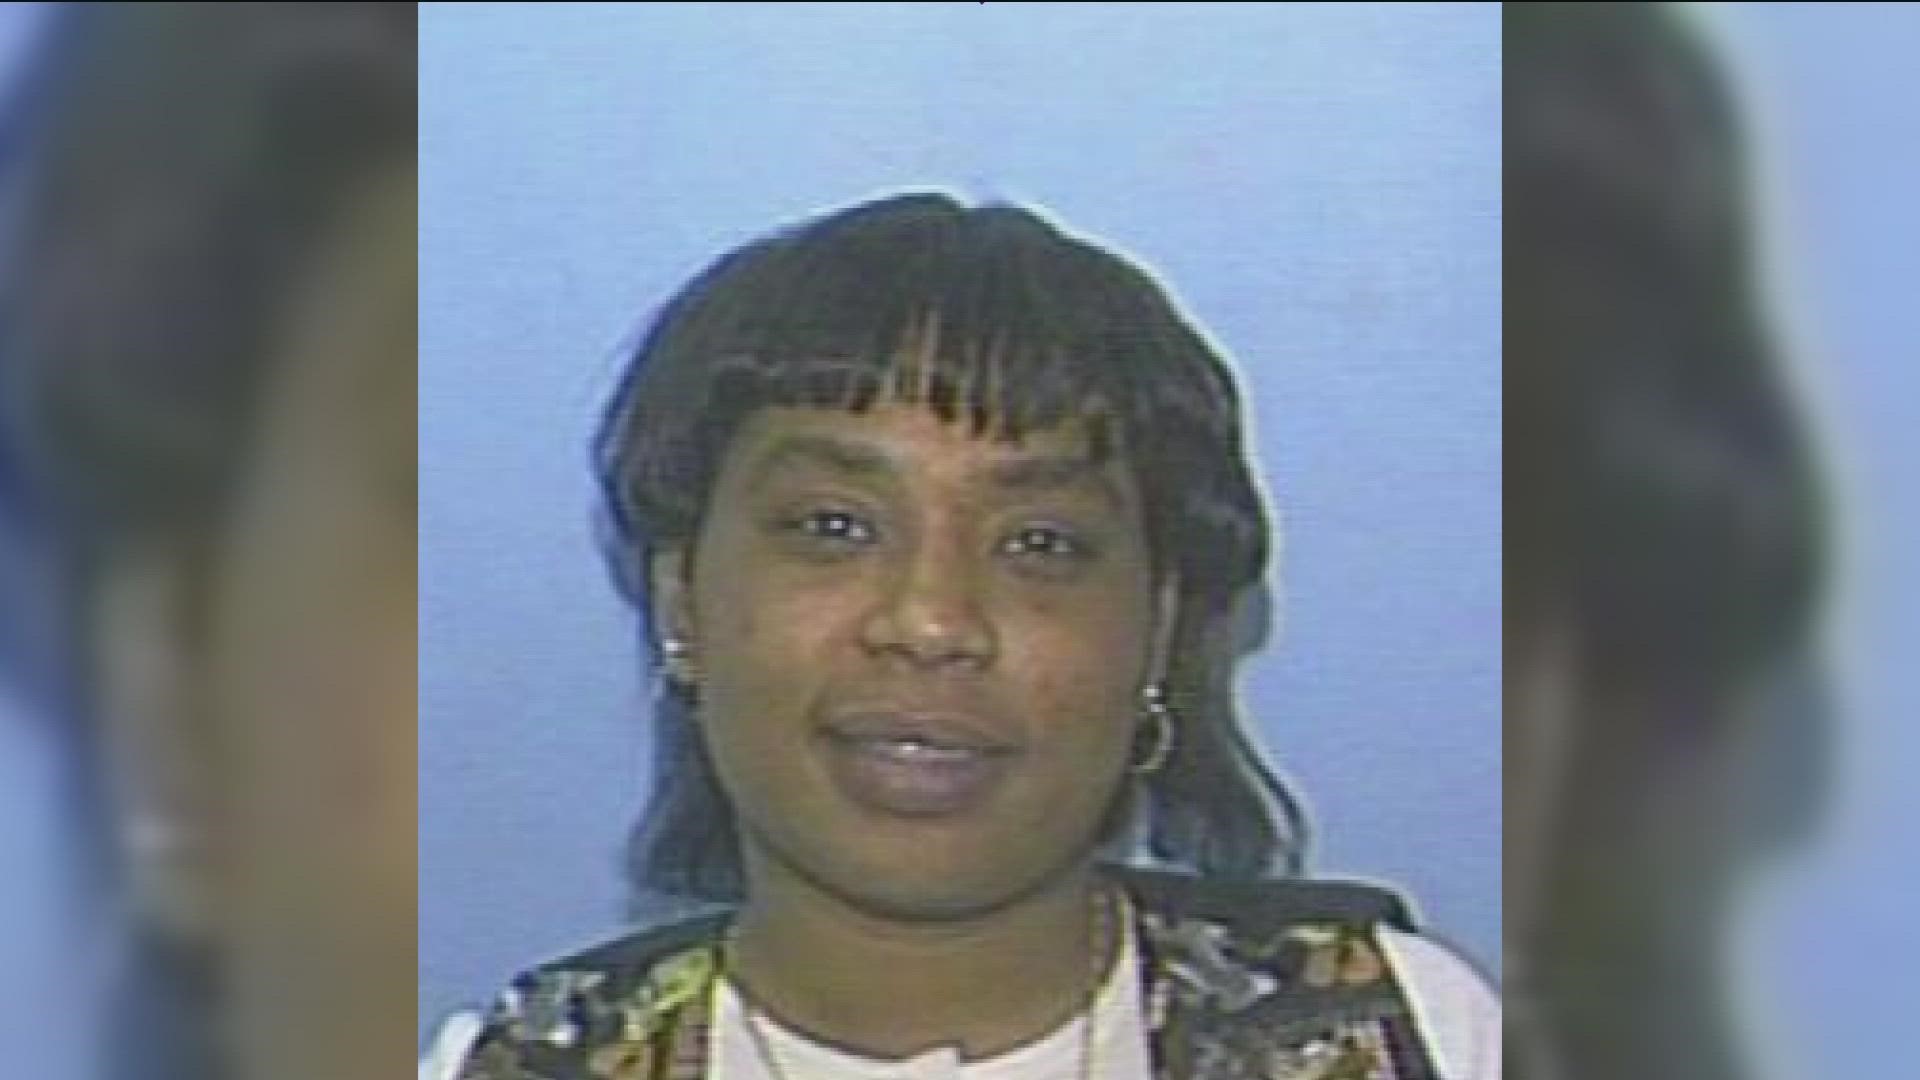 Lori A. Alexander, 27, was reported missing early in October 1998; her remains were found later that month.